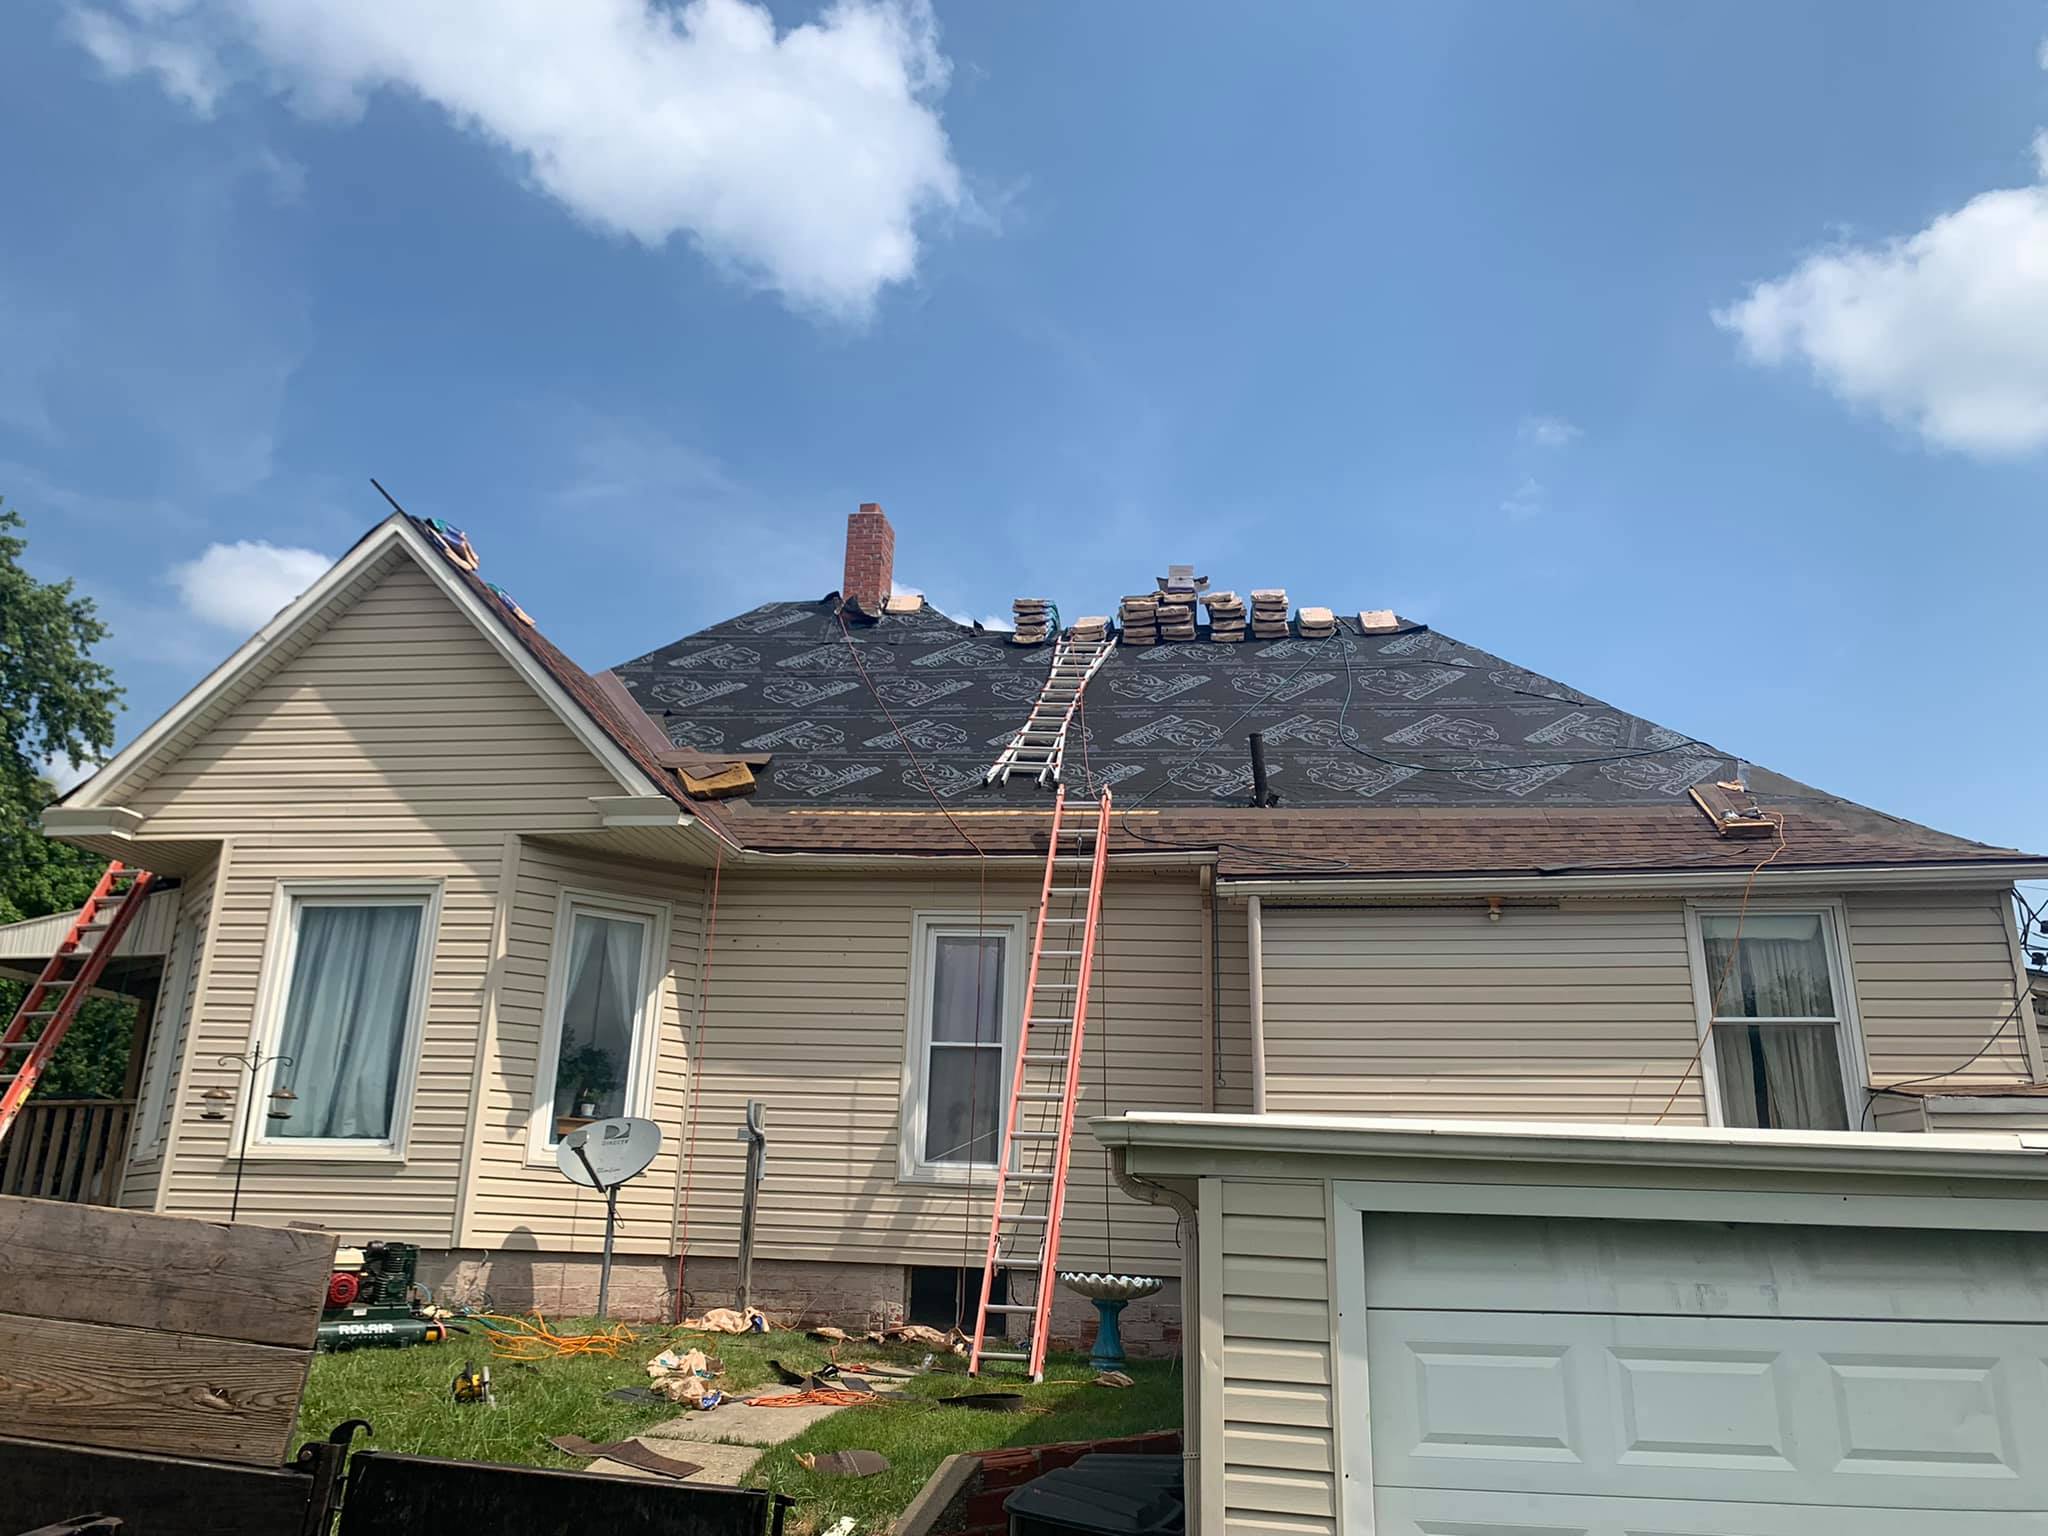 Roofing Companies Near Saint Joseph Missouri - 10 Tips To Help People Choose The Right One